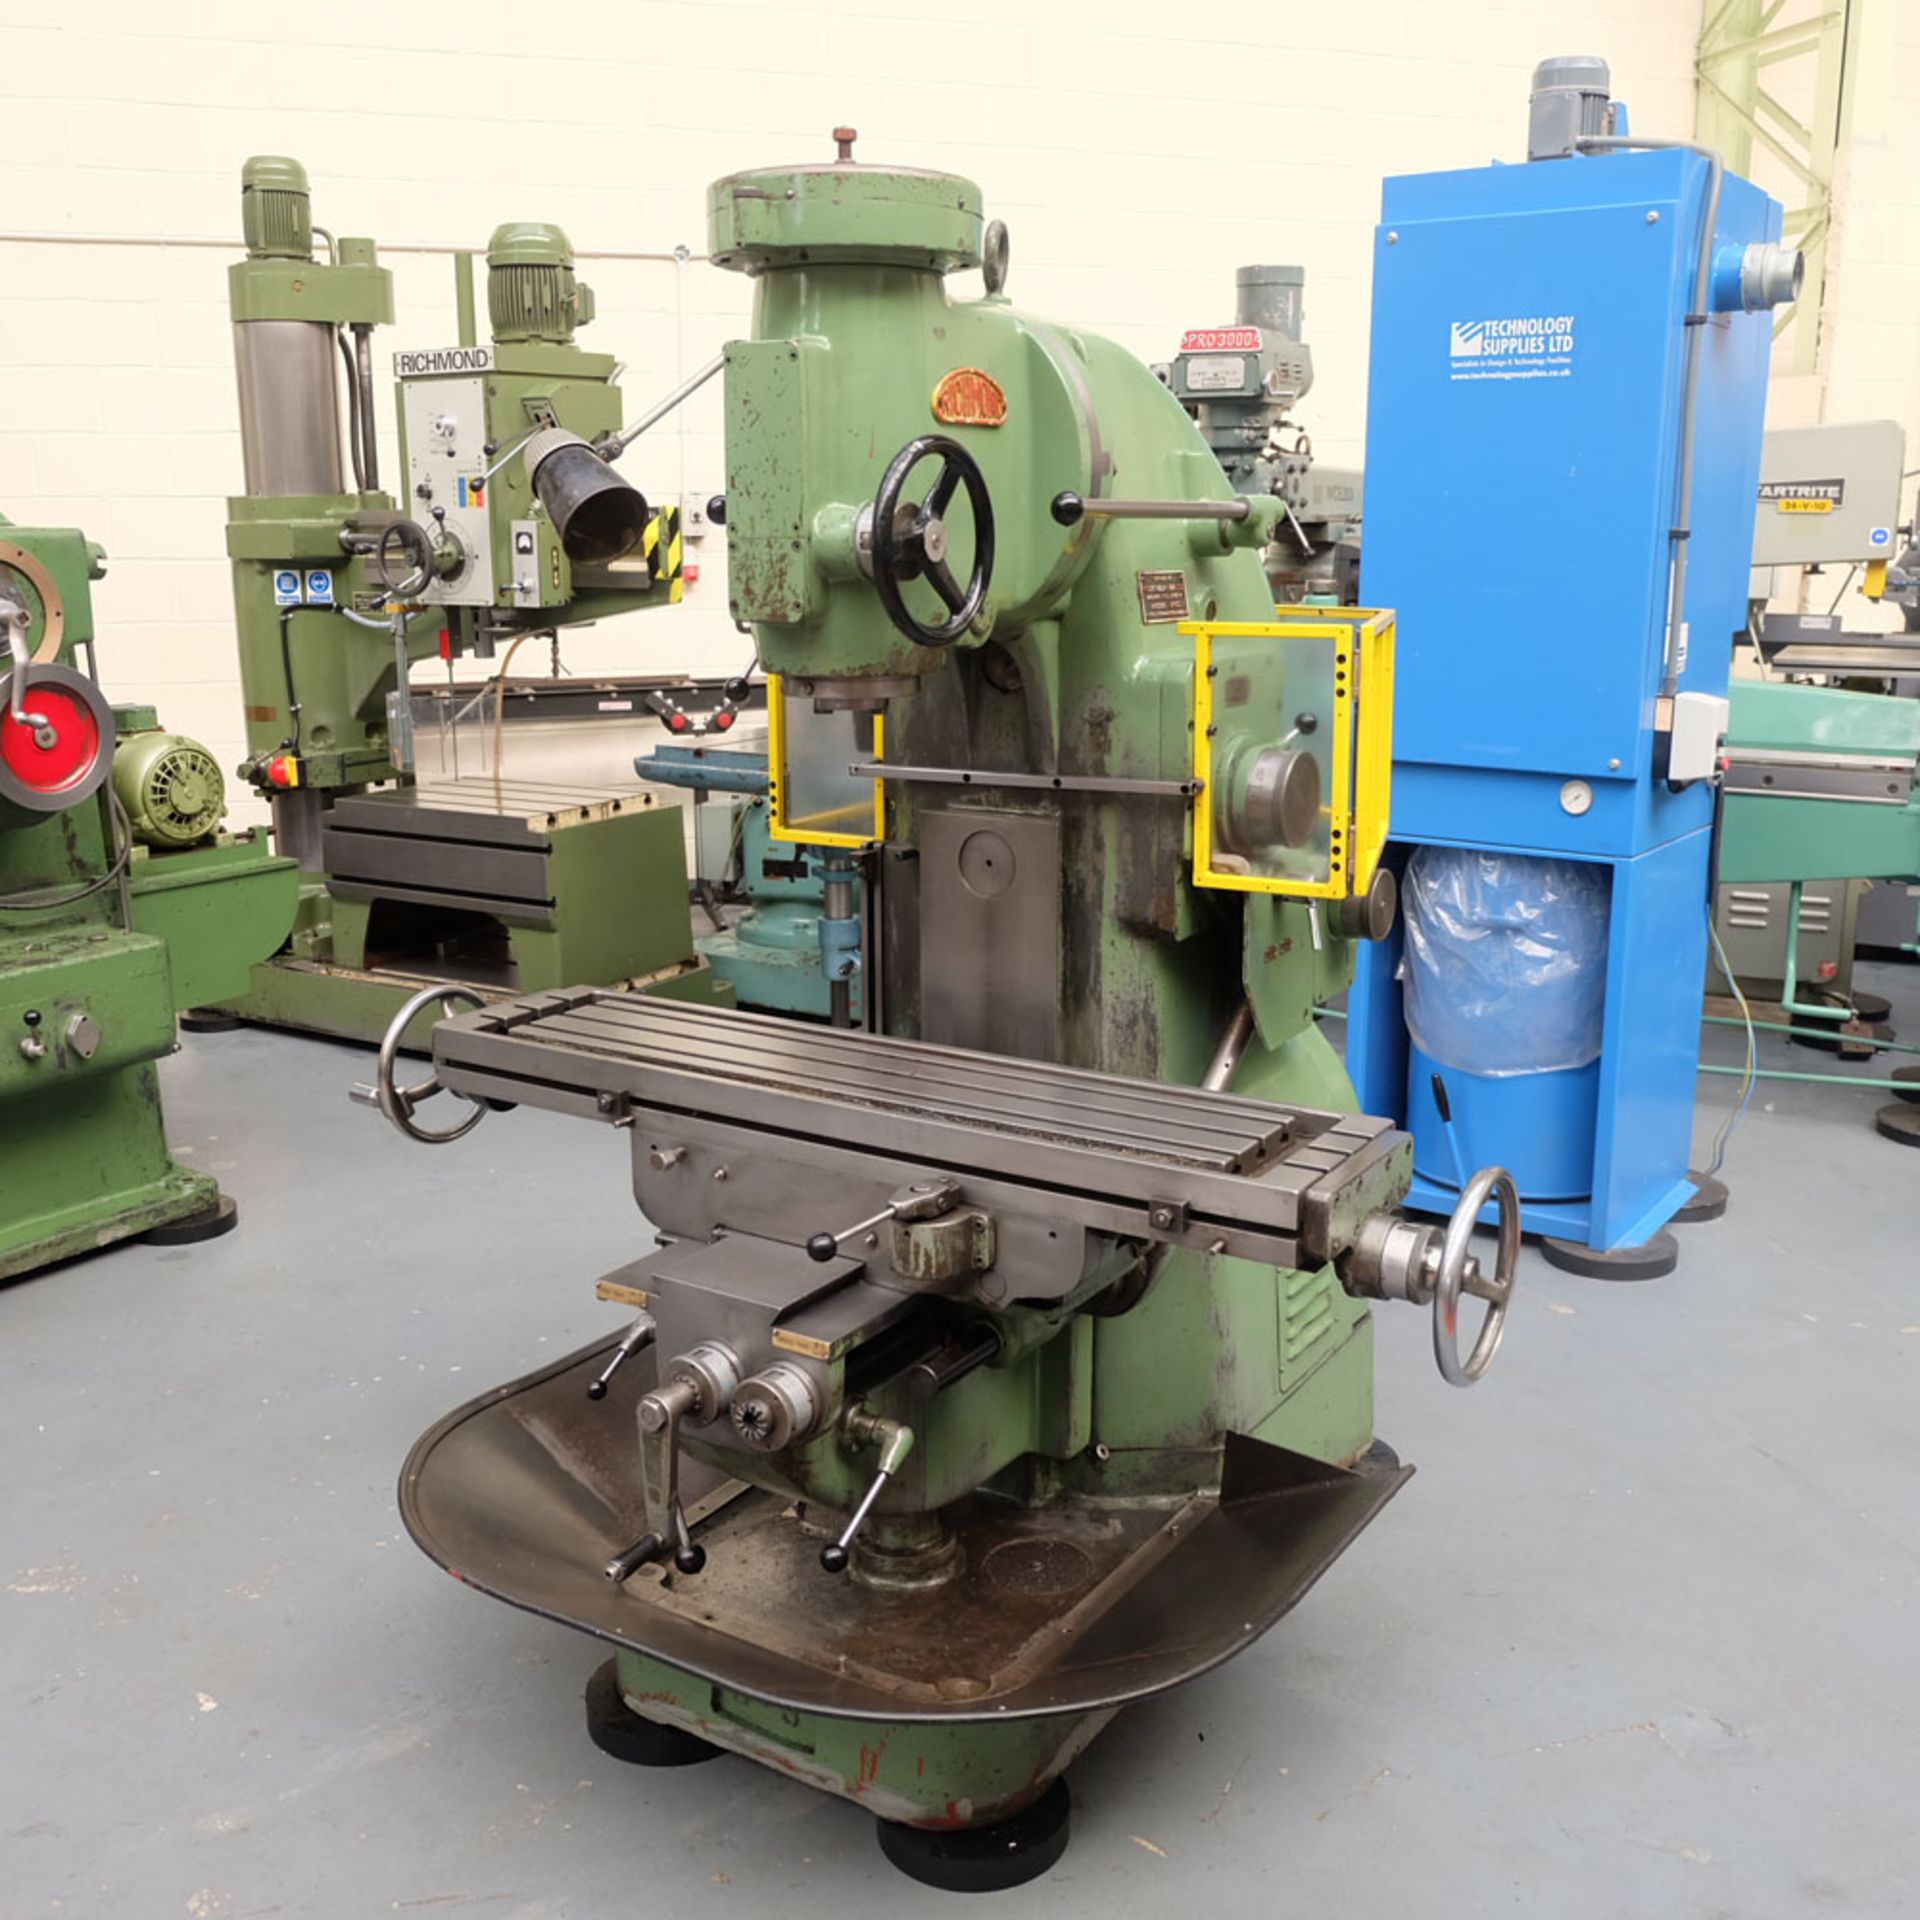 Richmond No.3V Vertical Milling Machine. Spindle Taper 40 INT. Table Size 48" x 11".